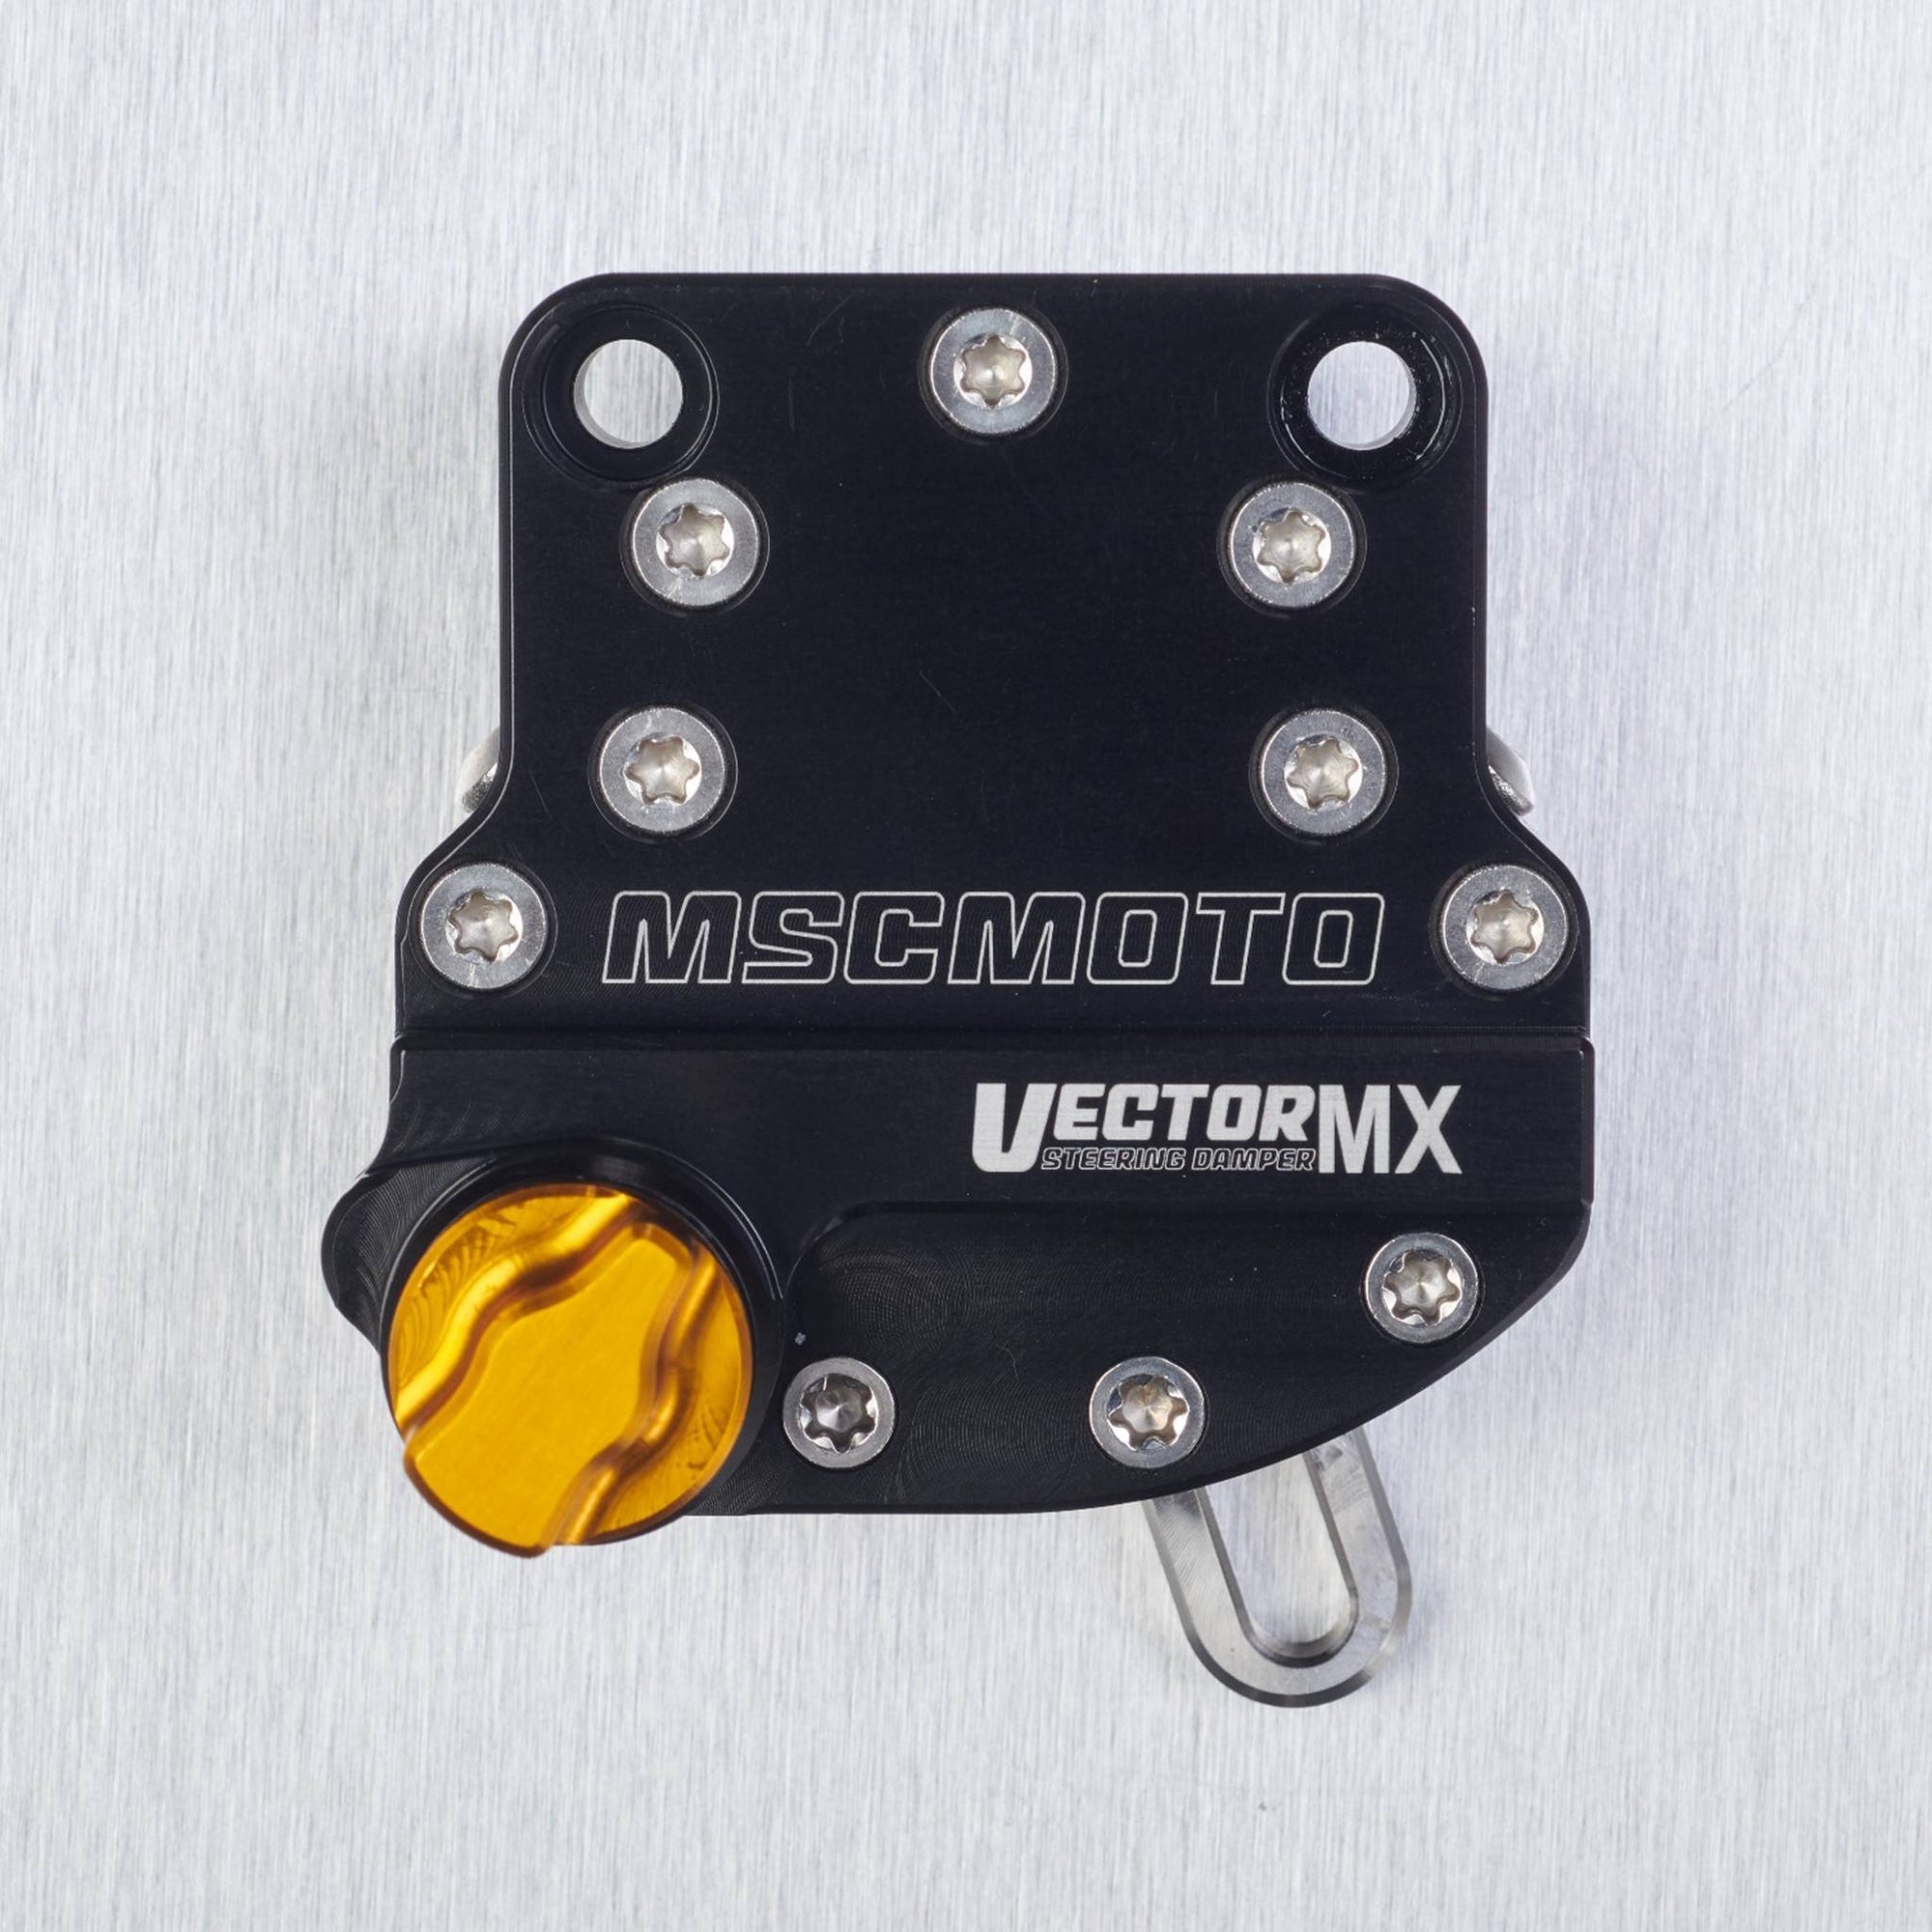 mscmotousa, VectorMX Steering Damper Kit "Down Under" Mount (VEC0005) - KTM (SX, SX-F, XC-F) HUSQVARNA (TC, FC, FX), VEC0005, husqvarna, husqvarna-2016-tc-125-esi1443929, ktm, ktm-2016-125-sx-esi6893684, vectormx, , Imported and distributed in North & South America by Lindeco Genuine Powersports.